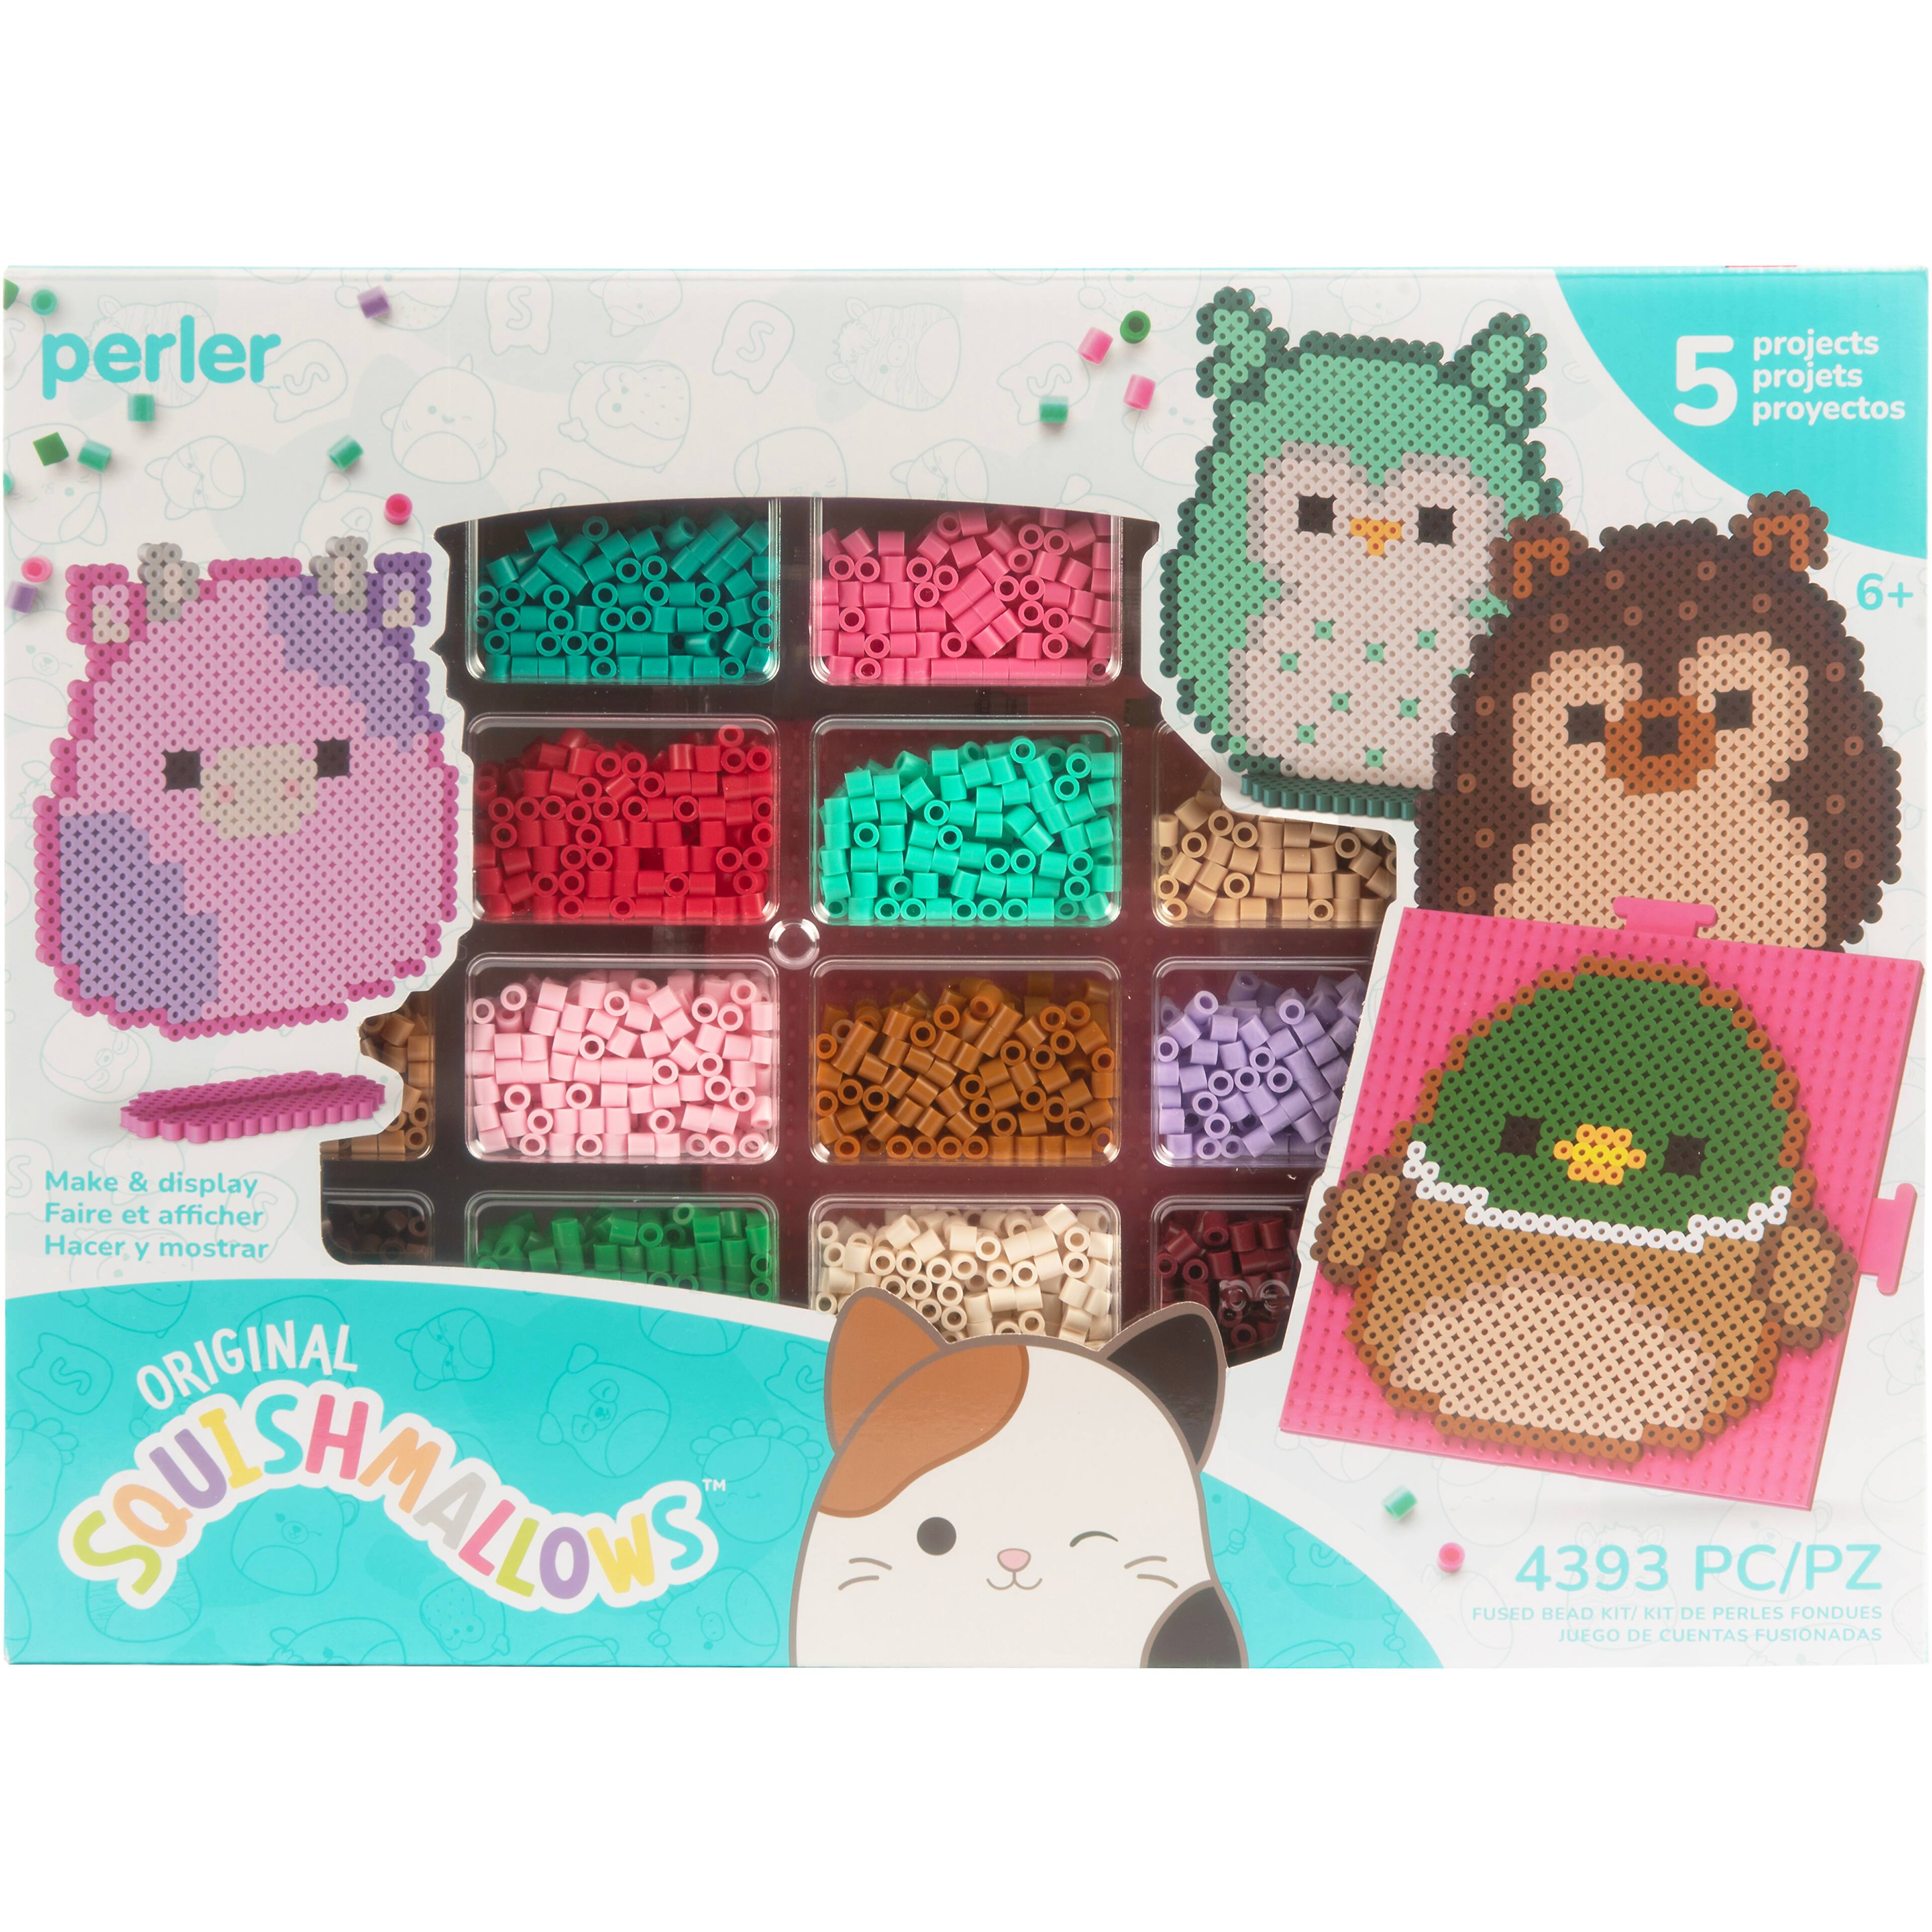 Squishmallow Perler bead set! Anyone else have this? : r/squishmallow